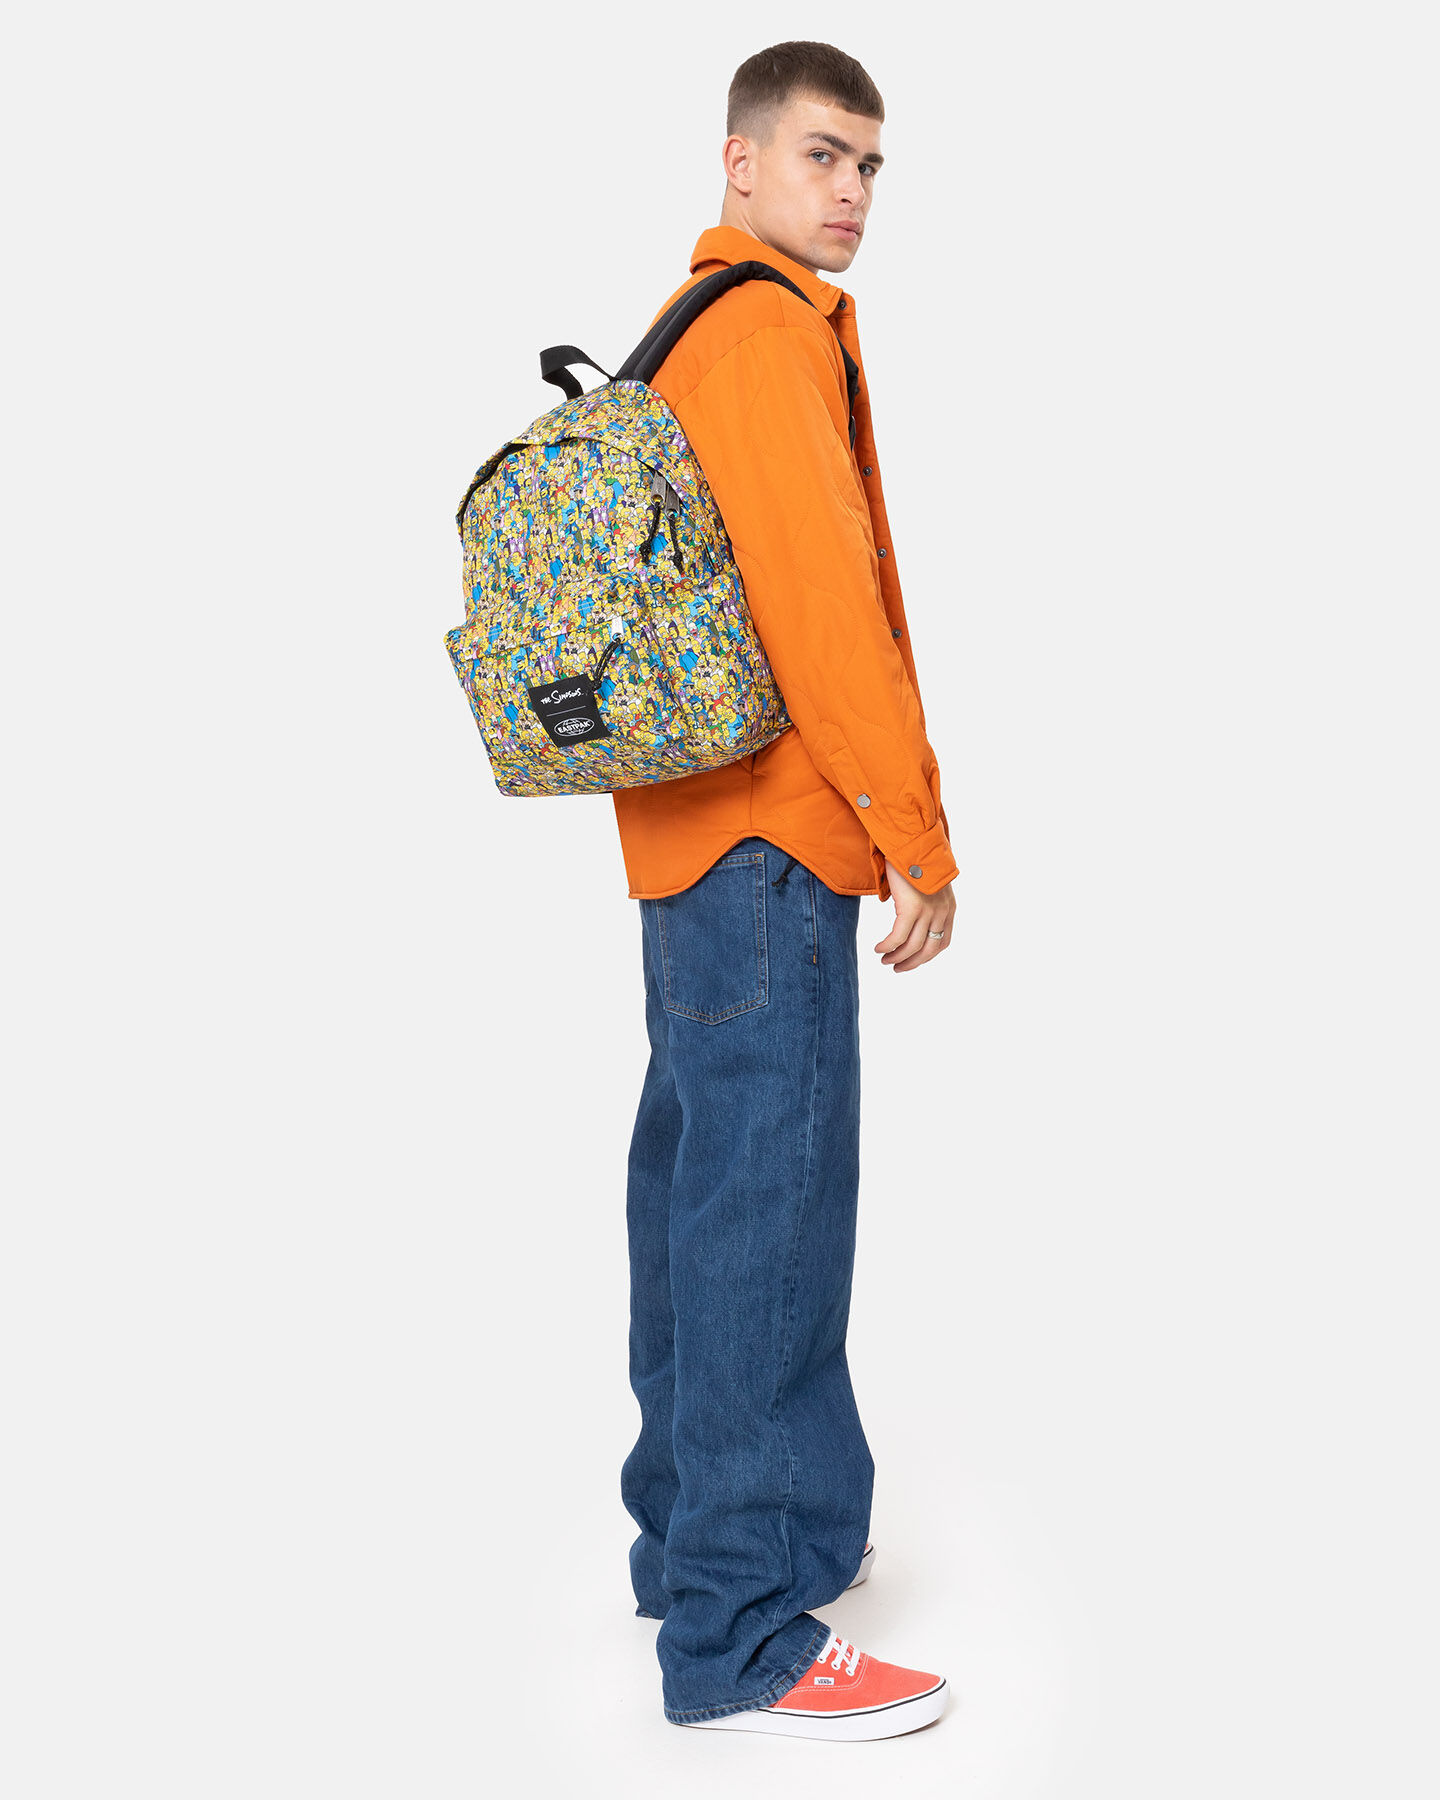  Zaino EASTPAK PADDED THE SIMPSONS  S5550522|7A2|OS scatto 3